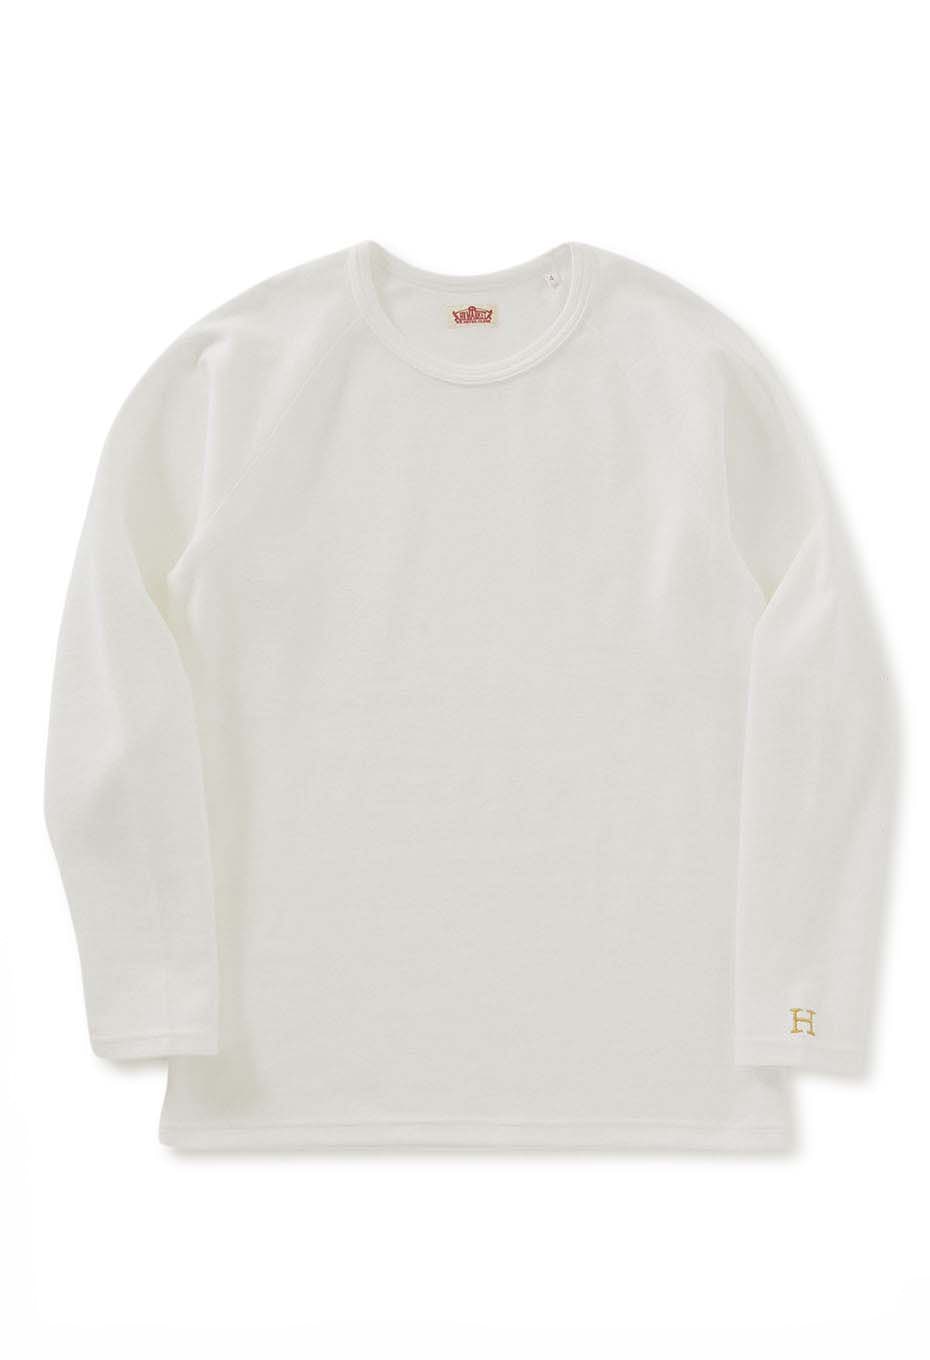 ★ stretch fraise long sleeve T-shirts /Shiny H embroidery